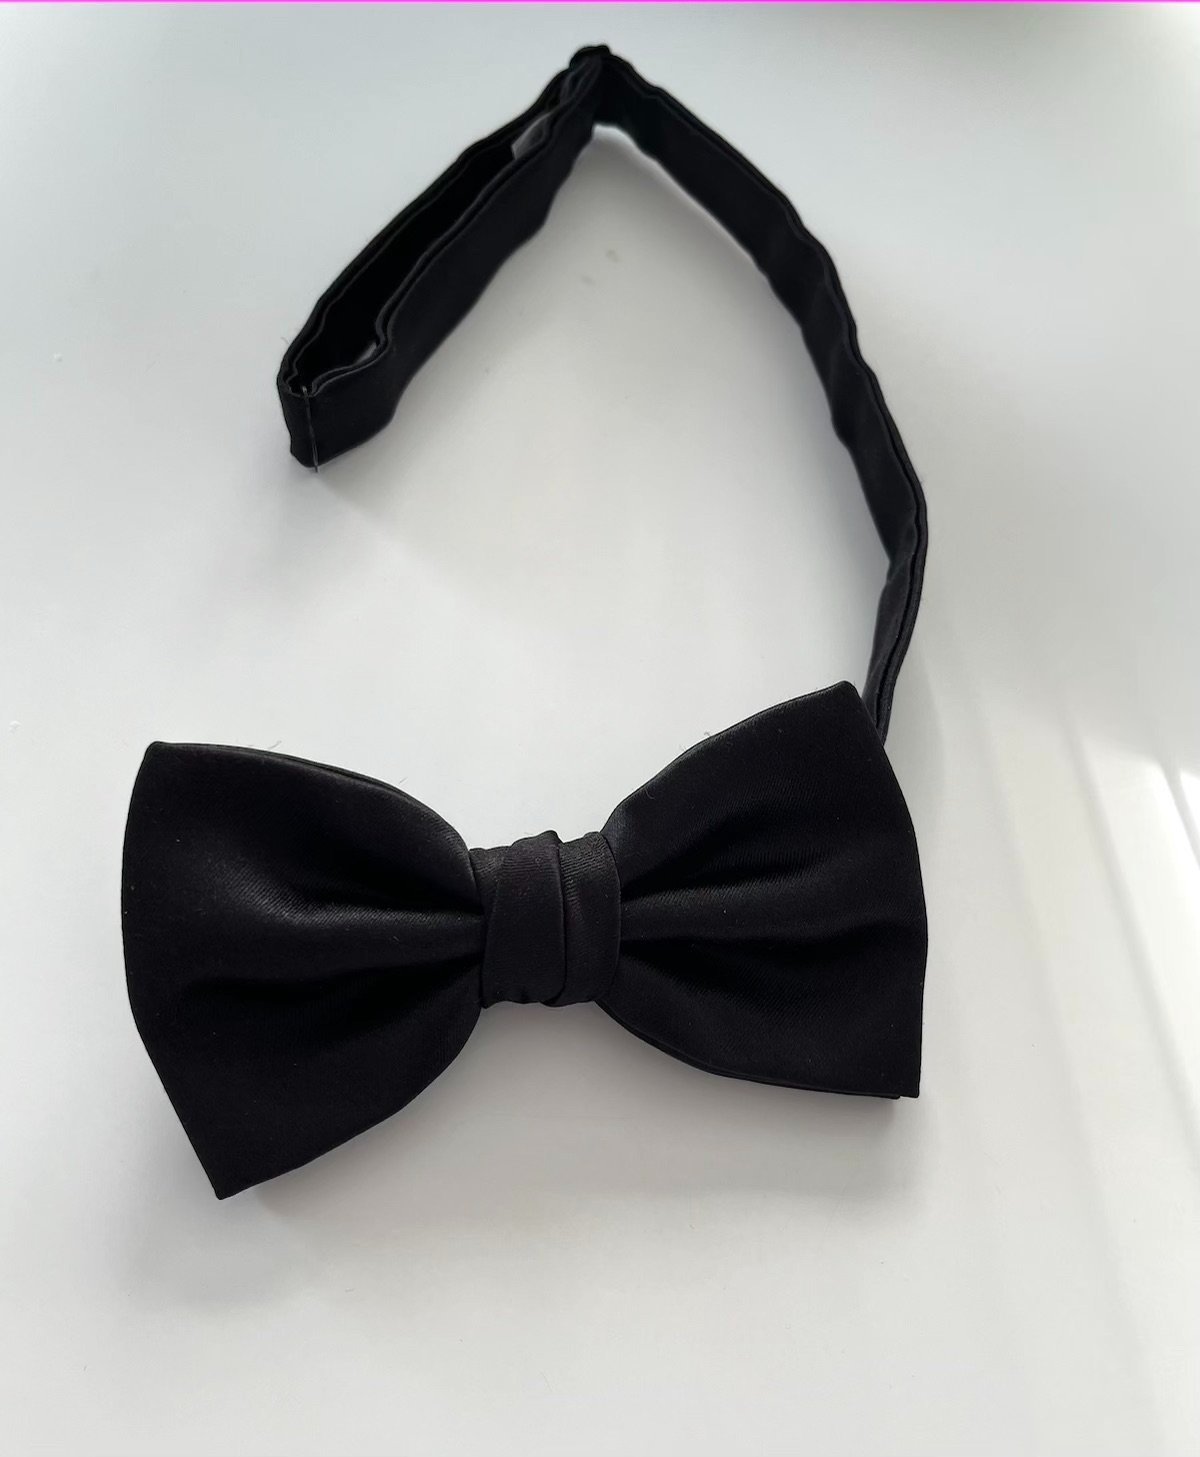 Black and Gold 4-way Butterfly Self-tying Bow Tie